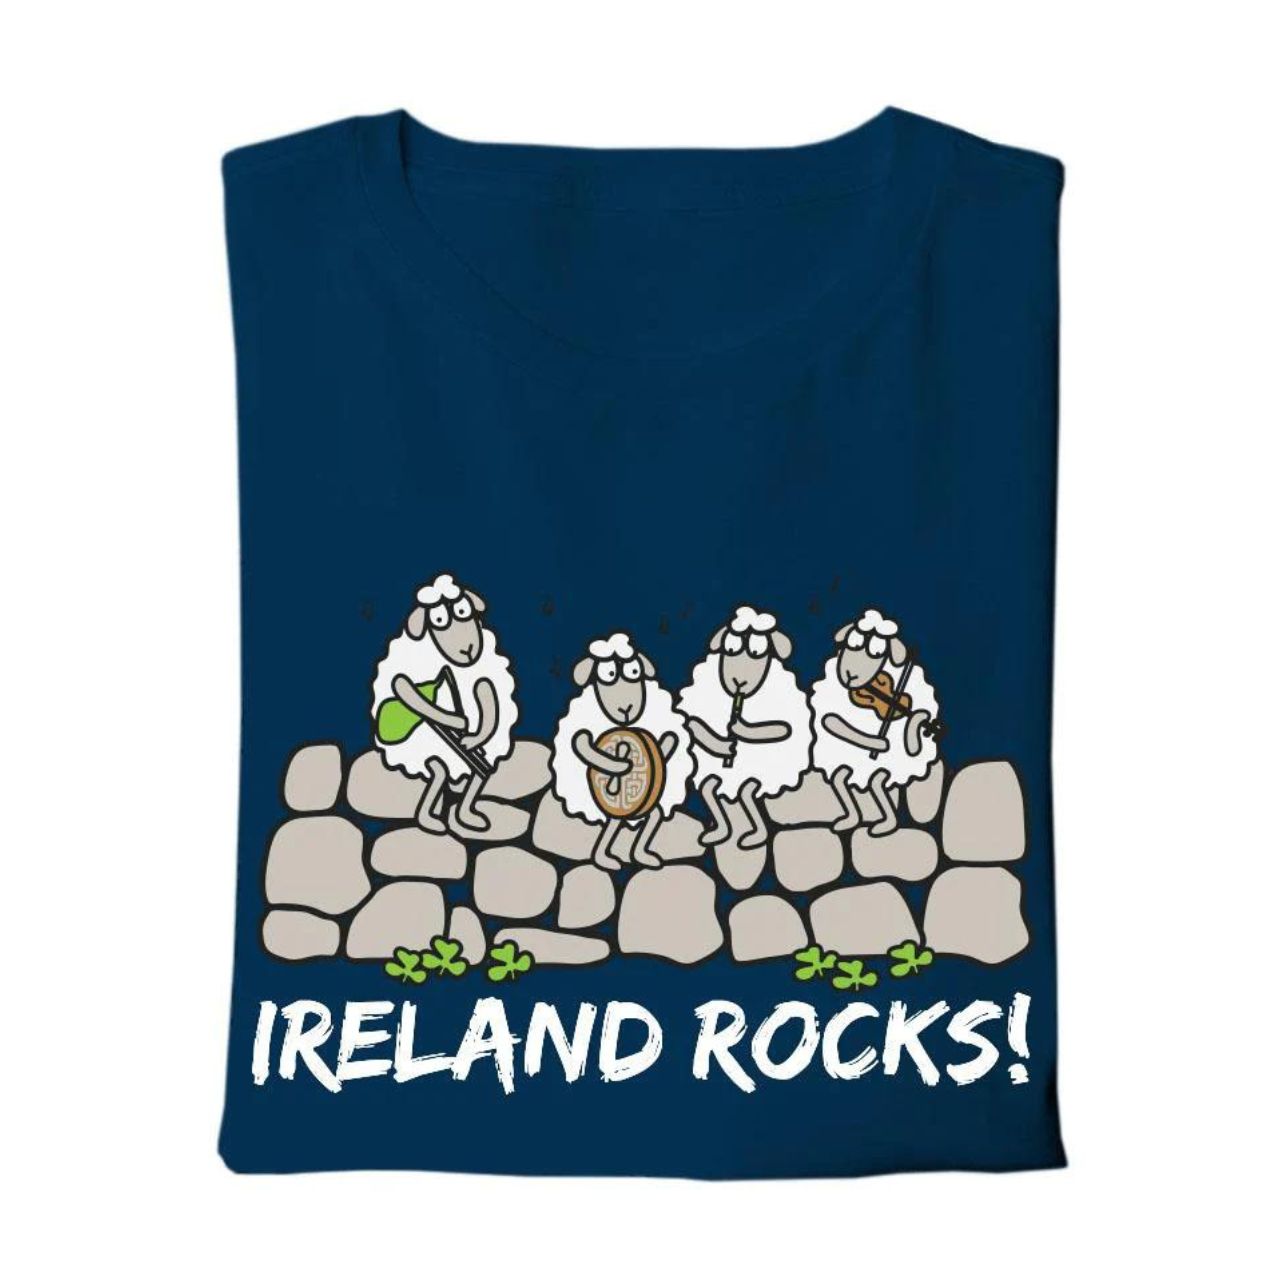 Cara Craft Navy Ireland Rocks Kids T-shirt  - 100% cotton* - Ash 99% cotton,1% polyester - Heather Grey 97% cotton, 3% polyester - Crew Neck - Designed And Printed in Ireland By Cara craft - Machine Washable